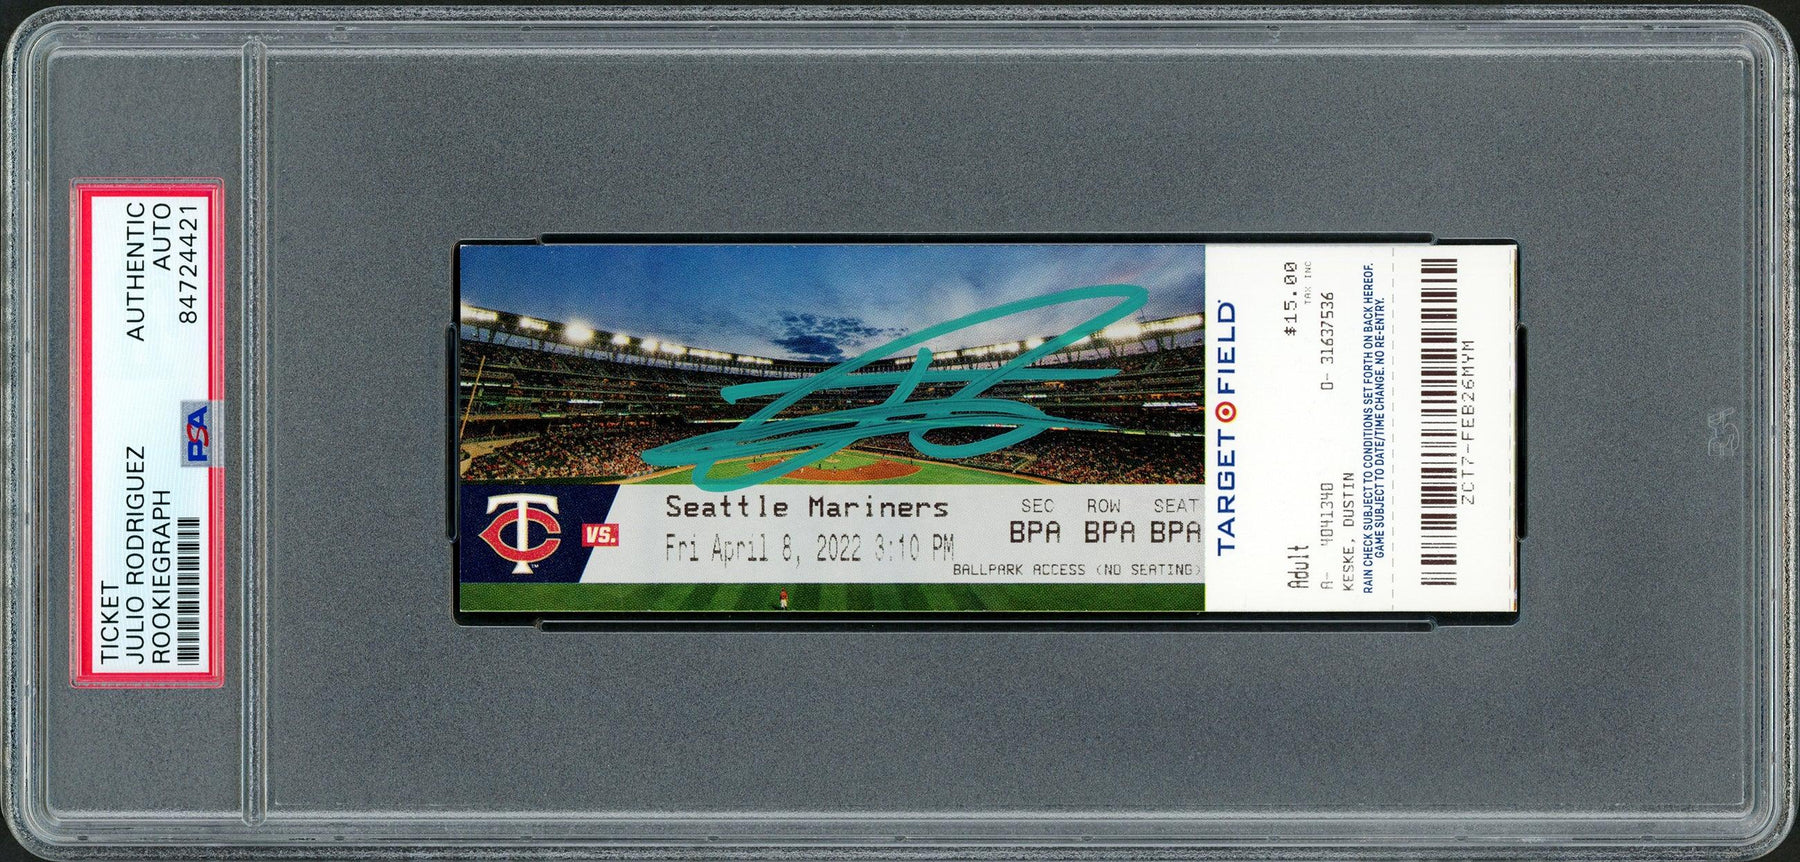 Julio Rodriguez Autographed MLB Debut Ticket 4/8/22 Seattle Mariners Stadium Picture In Teal PSA/DNA Stock #209771 - RSA